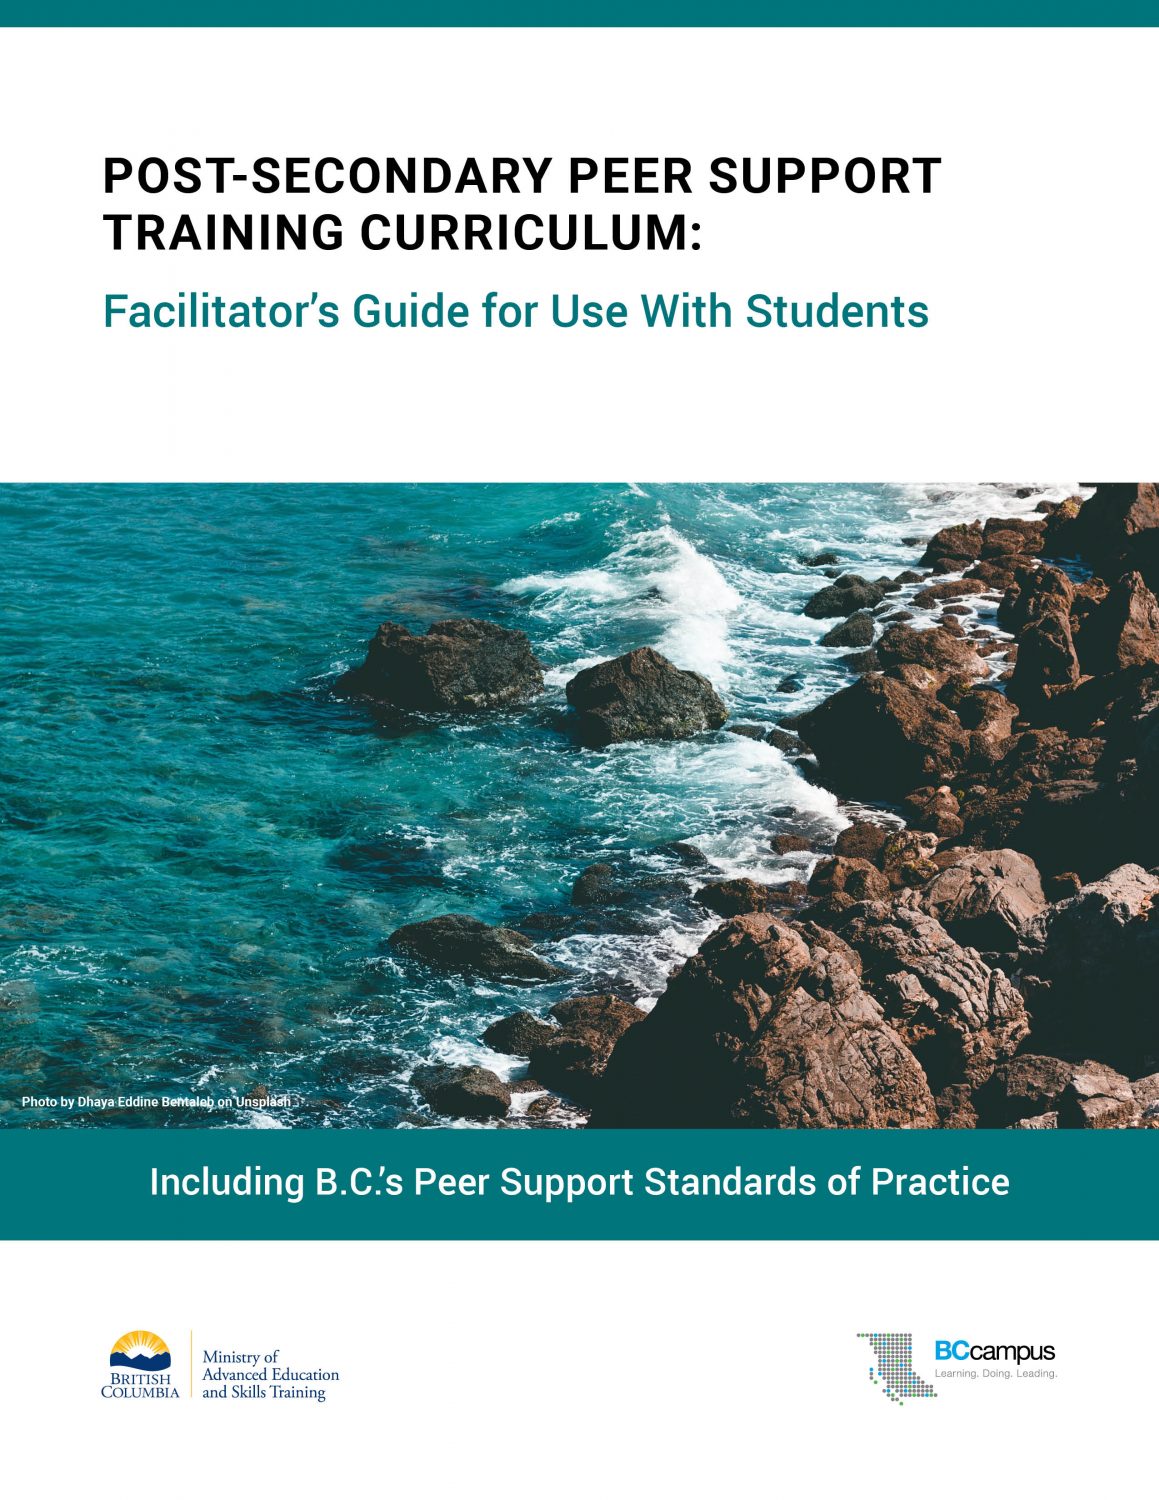 Cover image for Post-Secondary Peer Support Training Curriculum: Facilitator's Guide for Use With Students